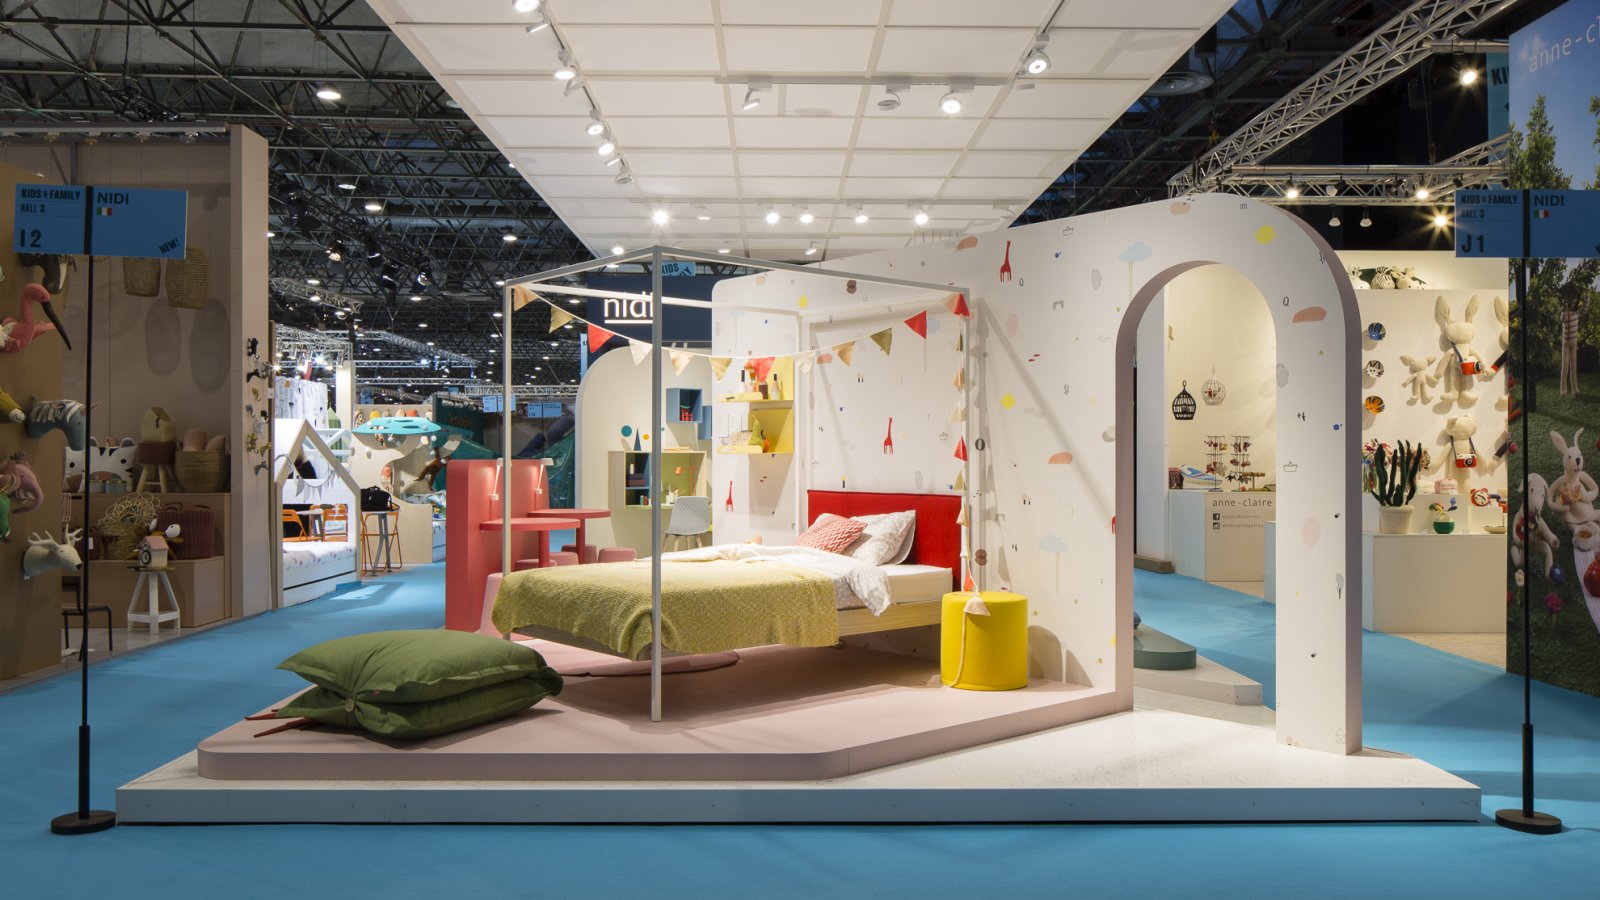 Thanks for participating in Maison&Objet 2019!